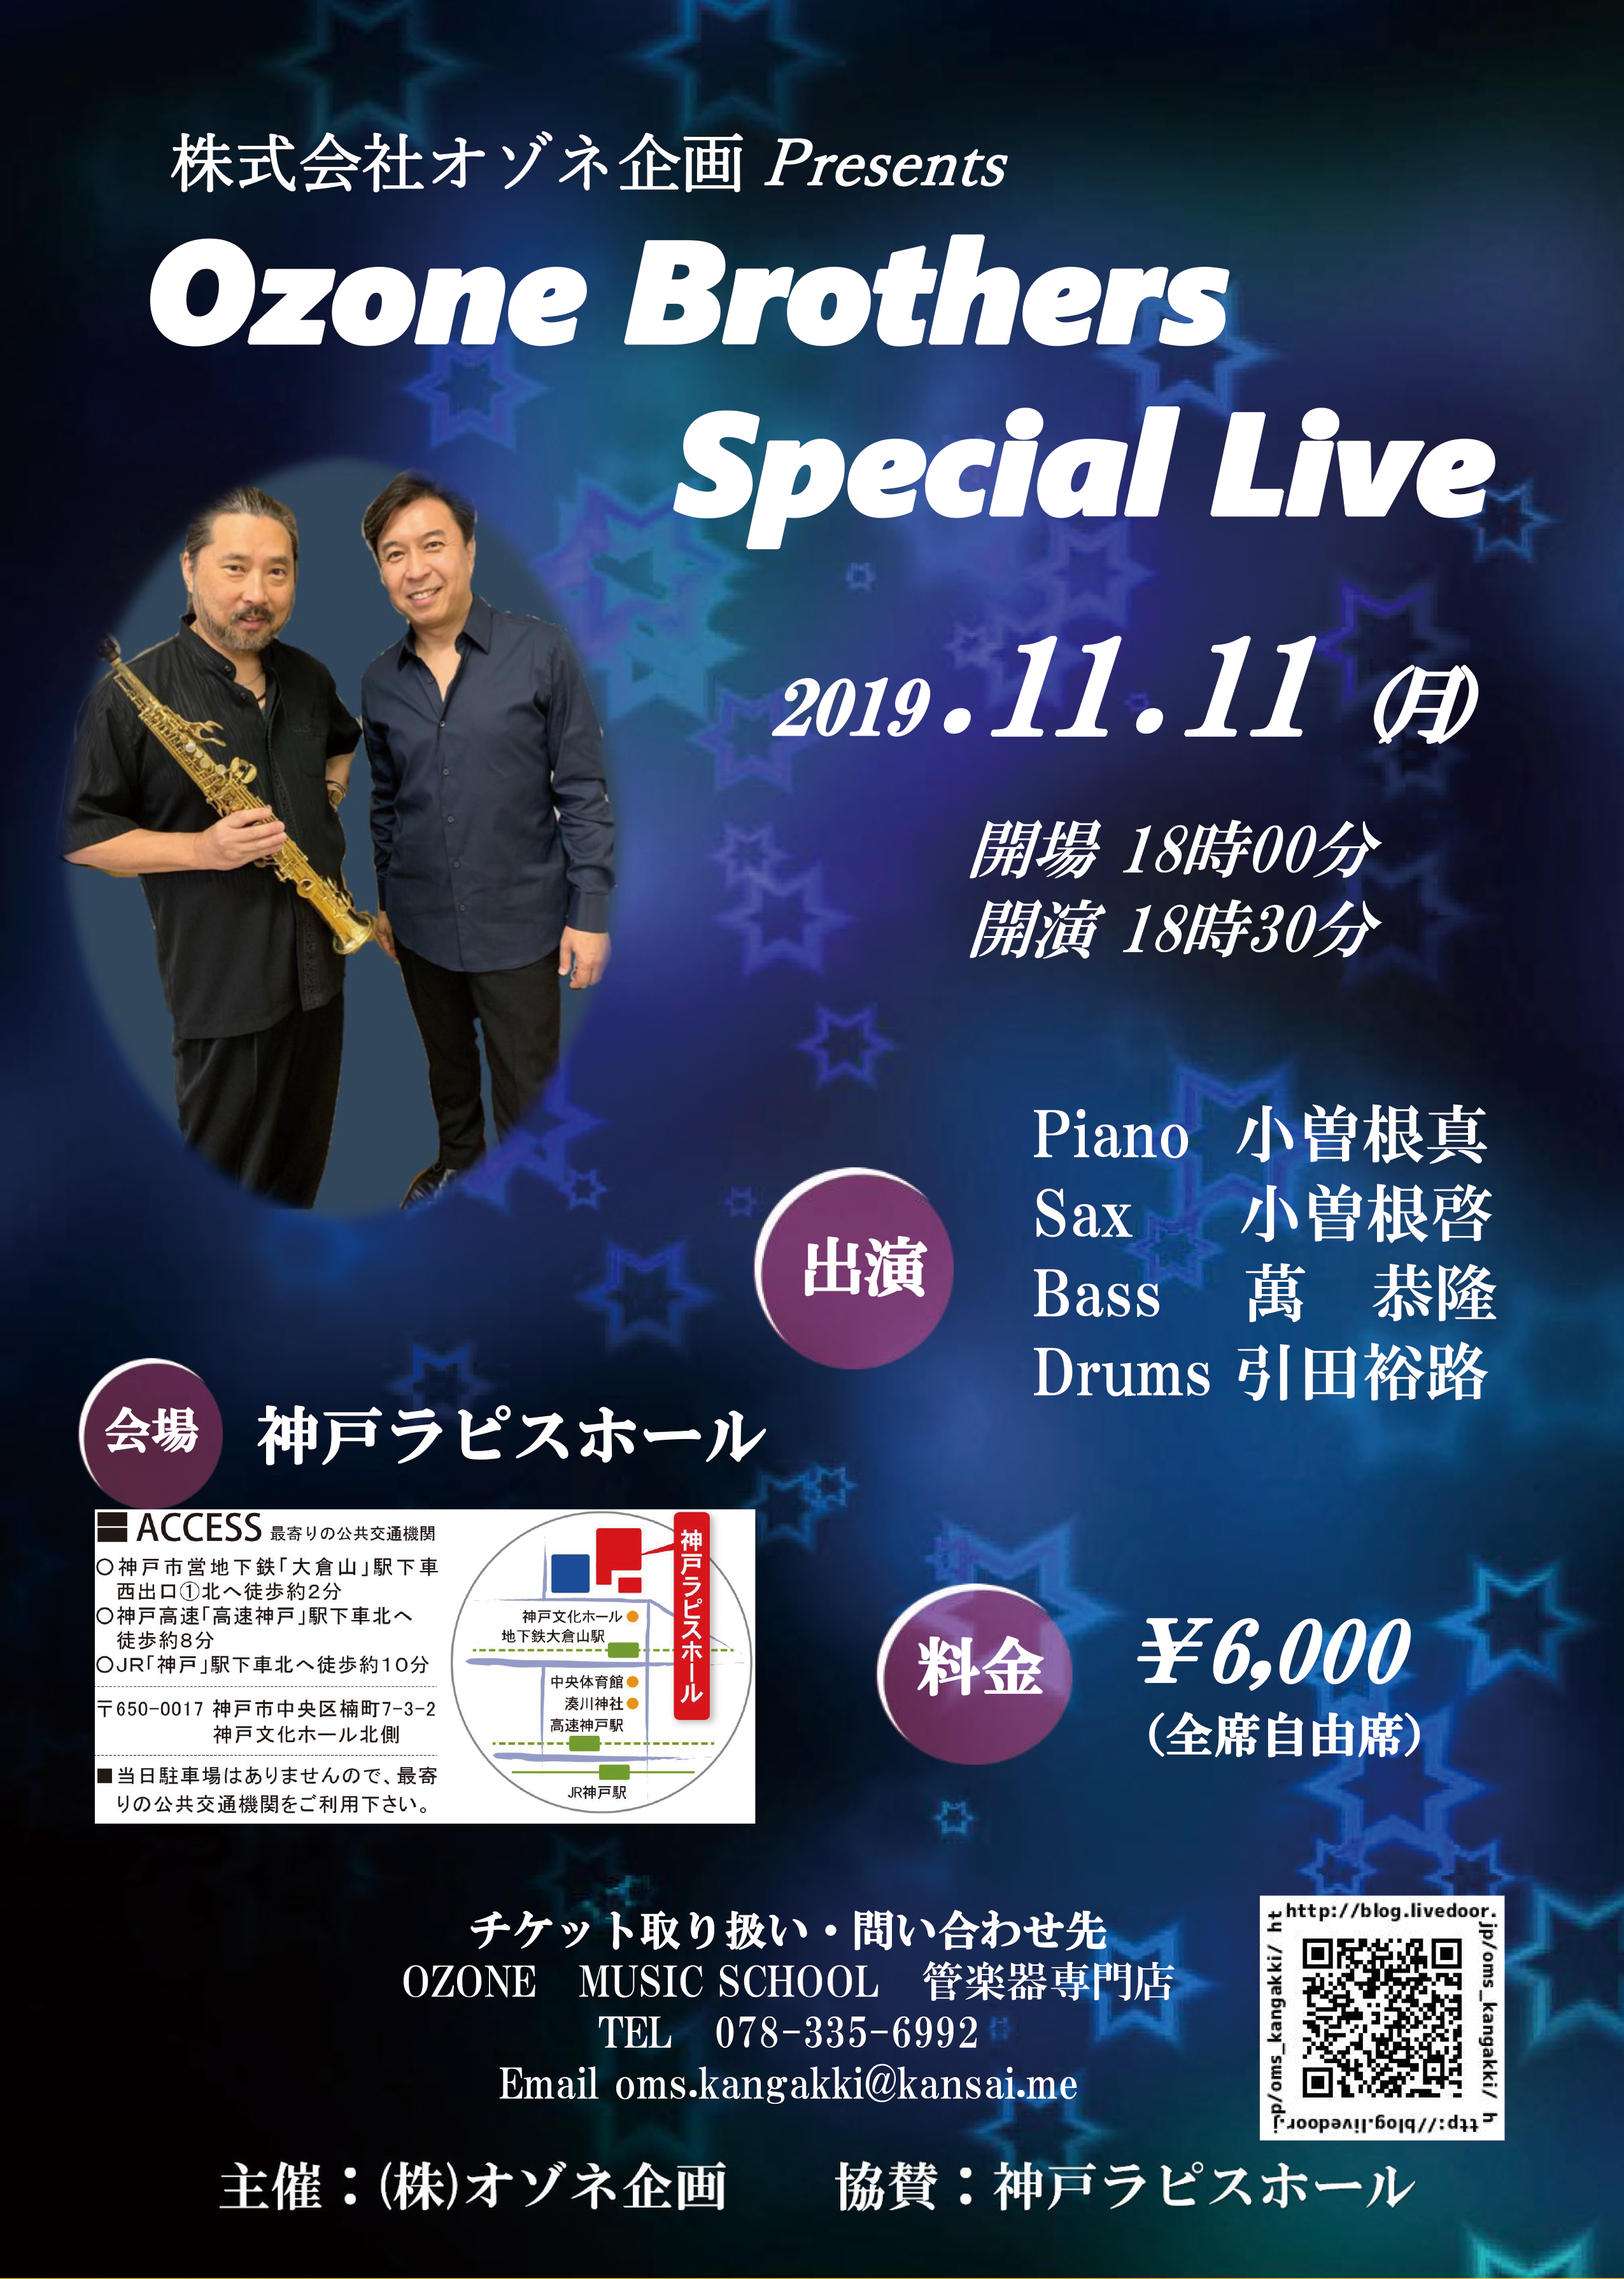 Ozone Brothers Special Live